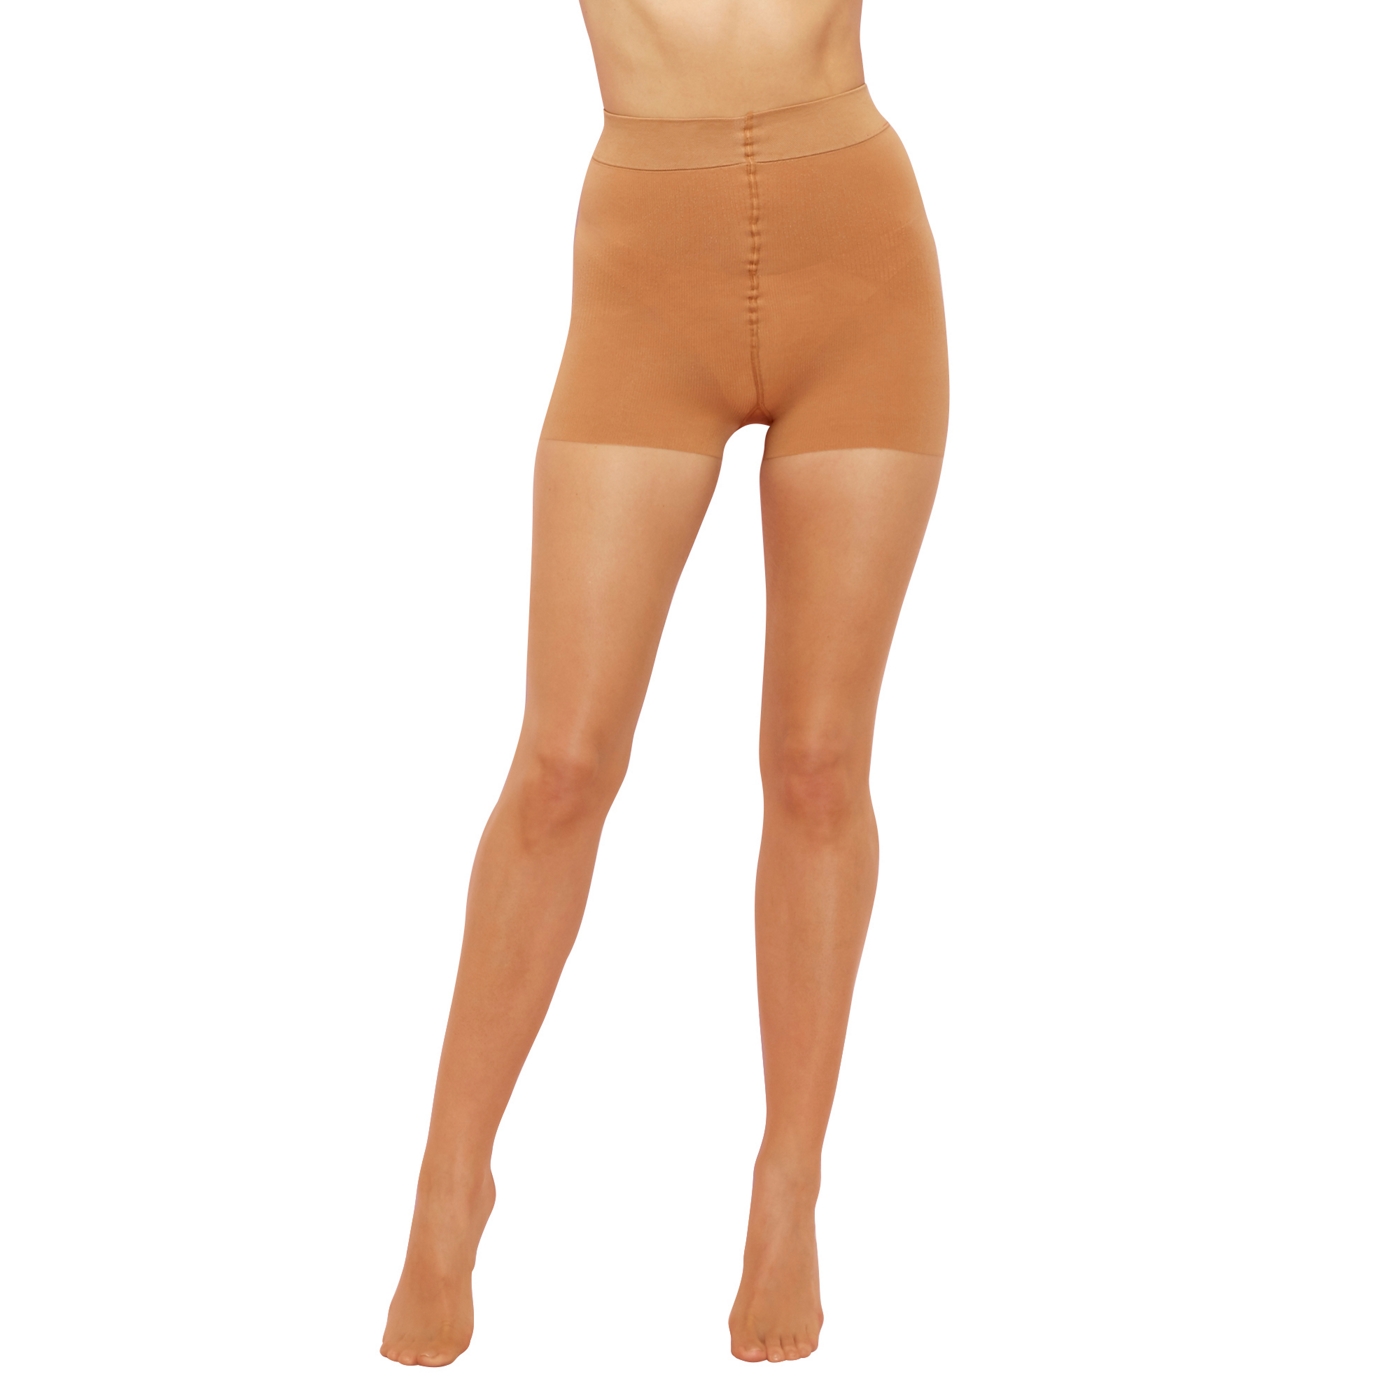 Natural sheer firm control high waist shaping tight